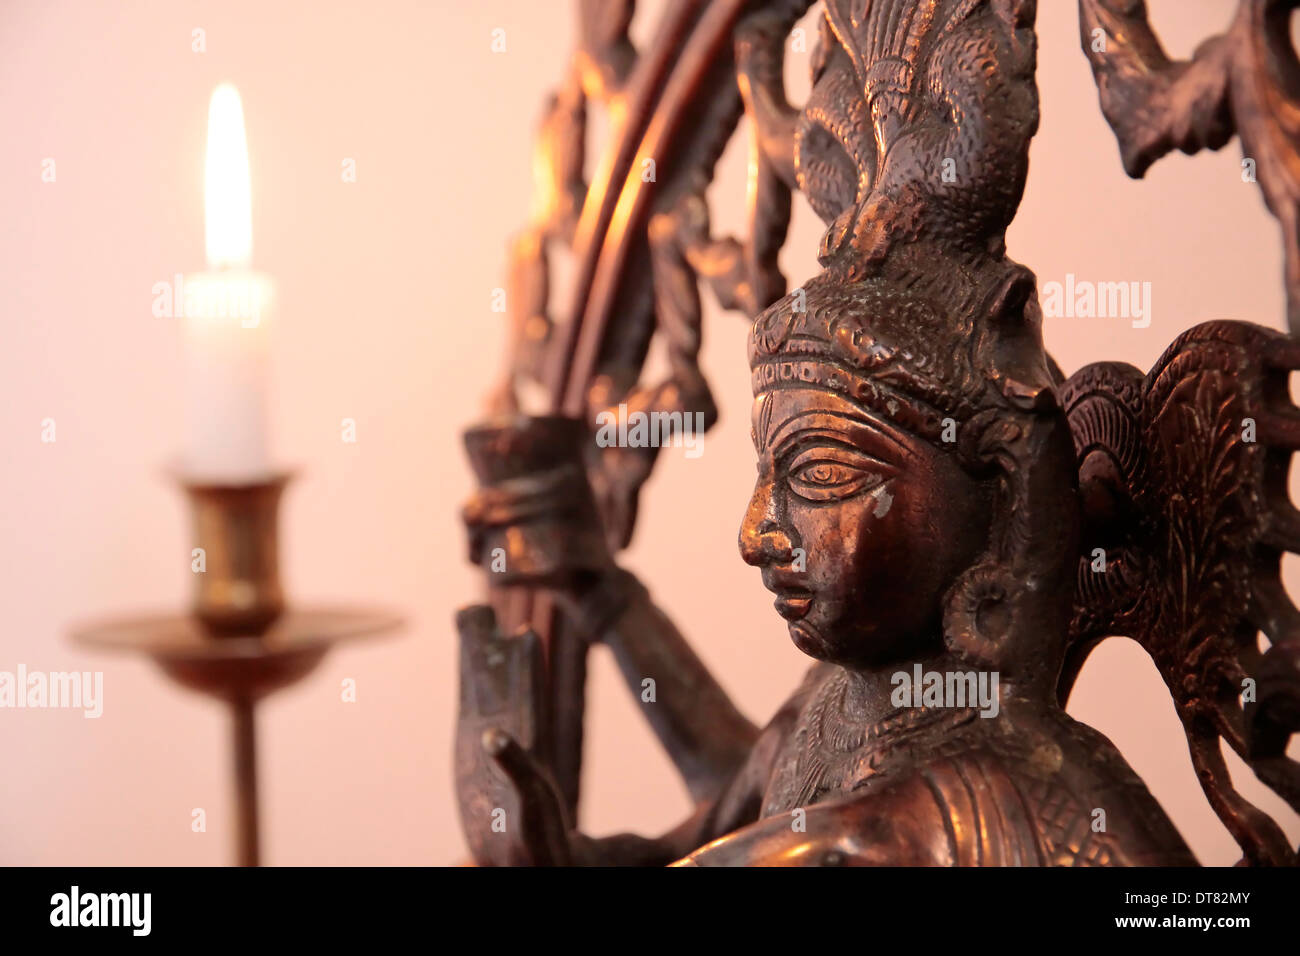 Statue of the goddess Shiva with candle as decoration in a yoga room Stock Photo